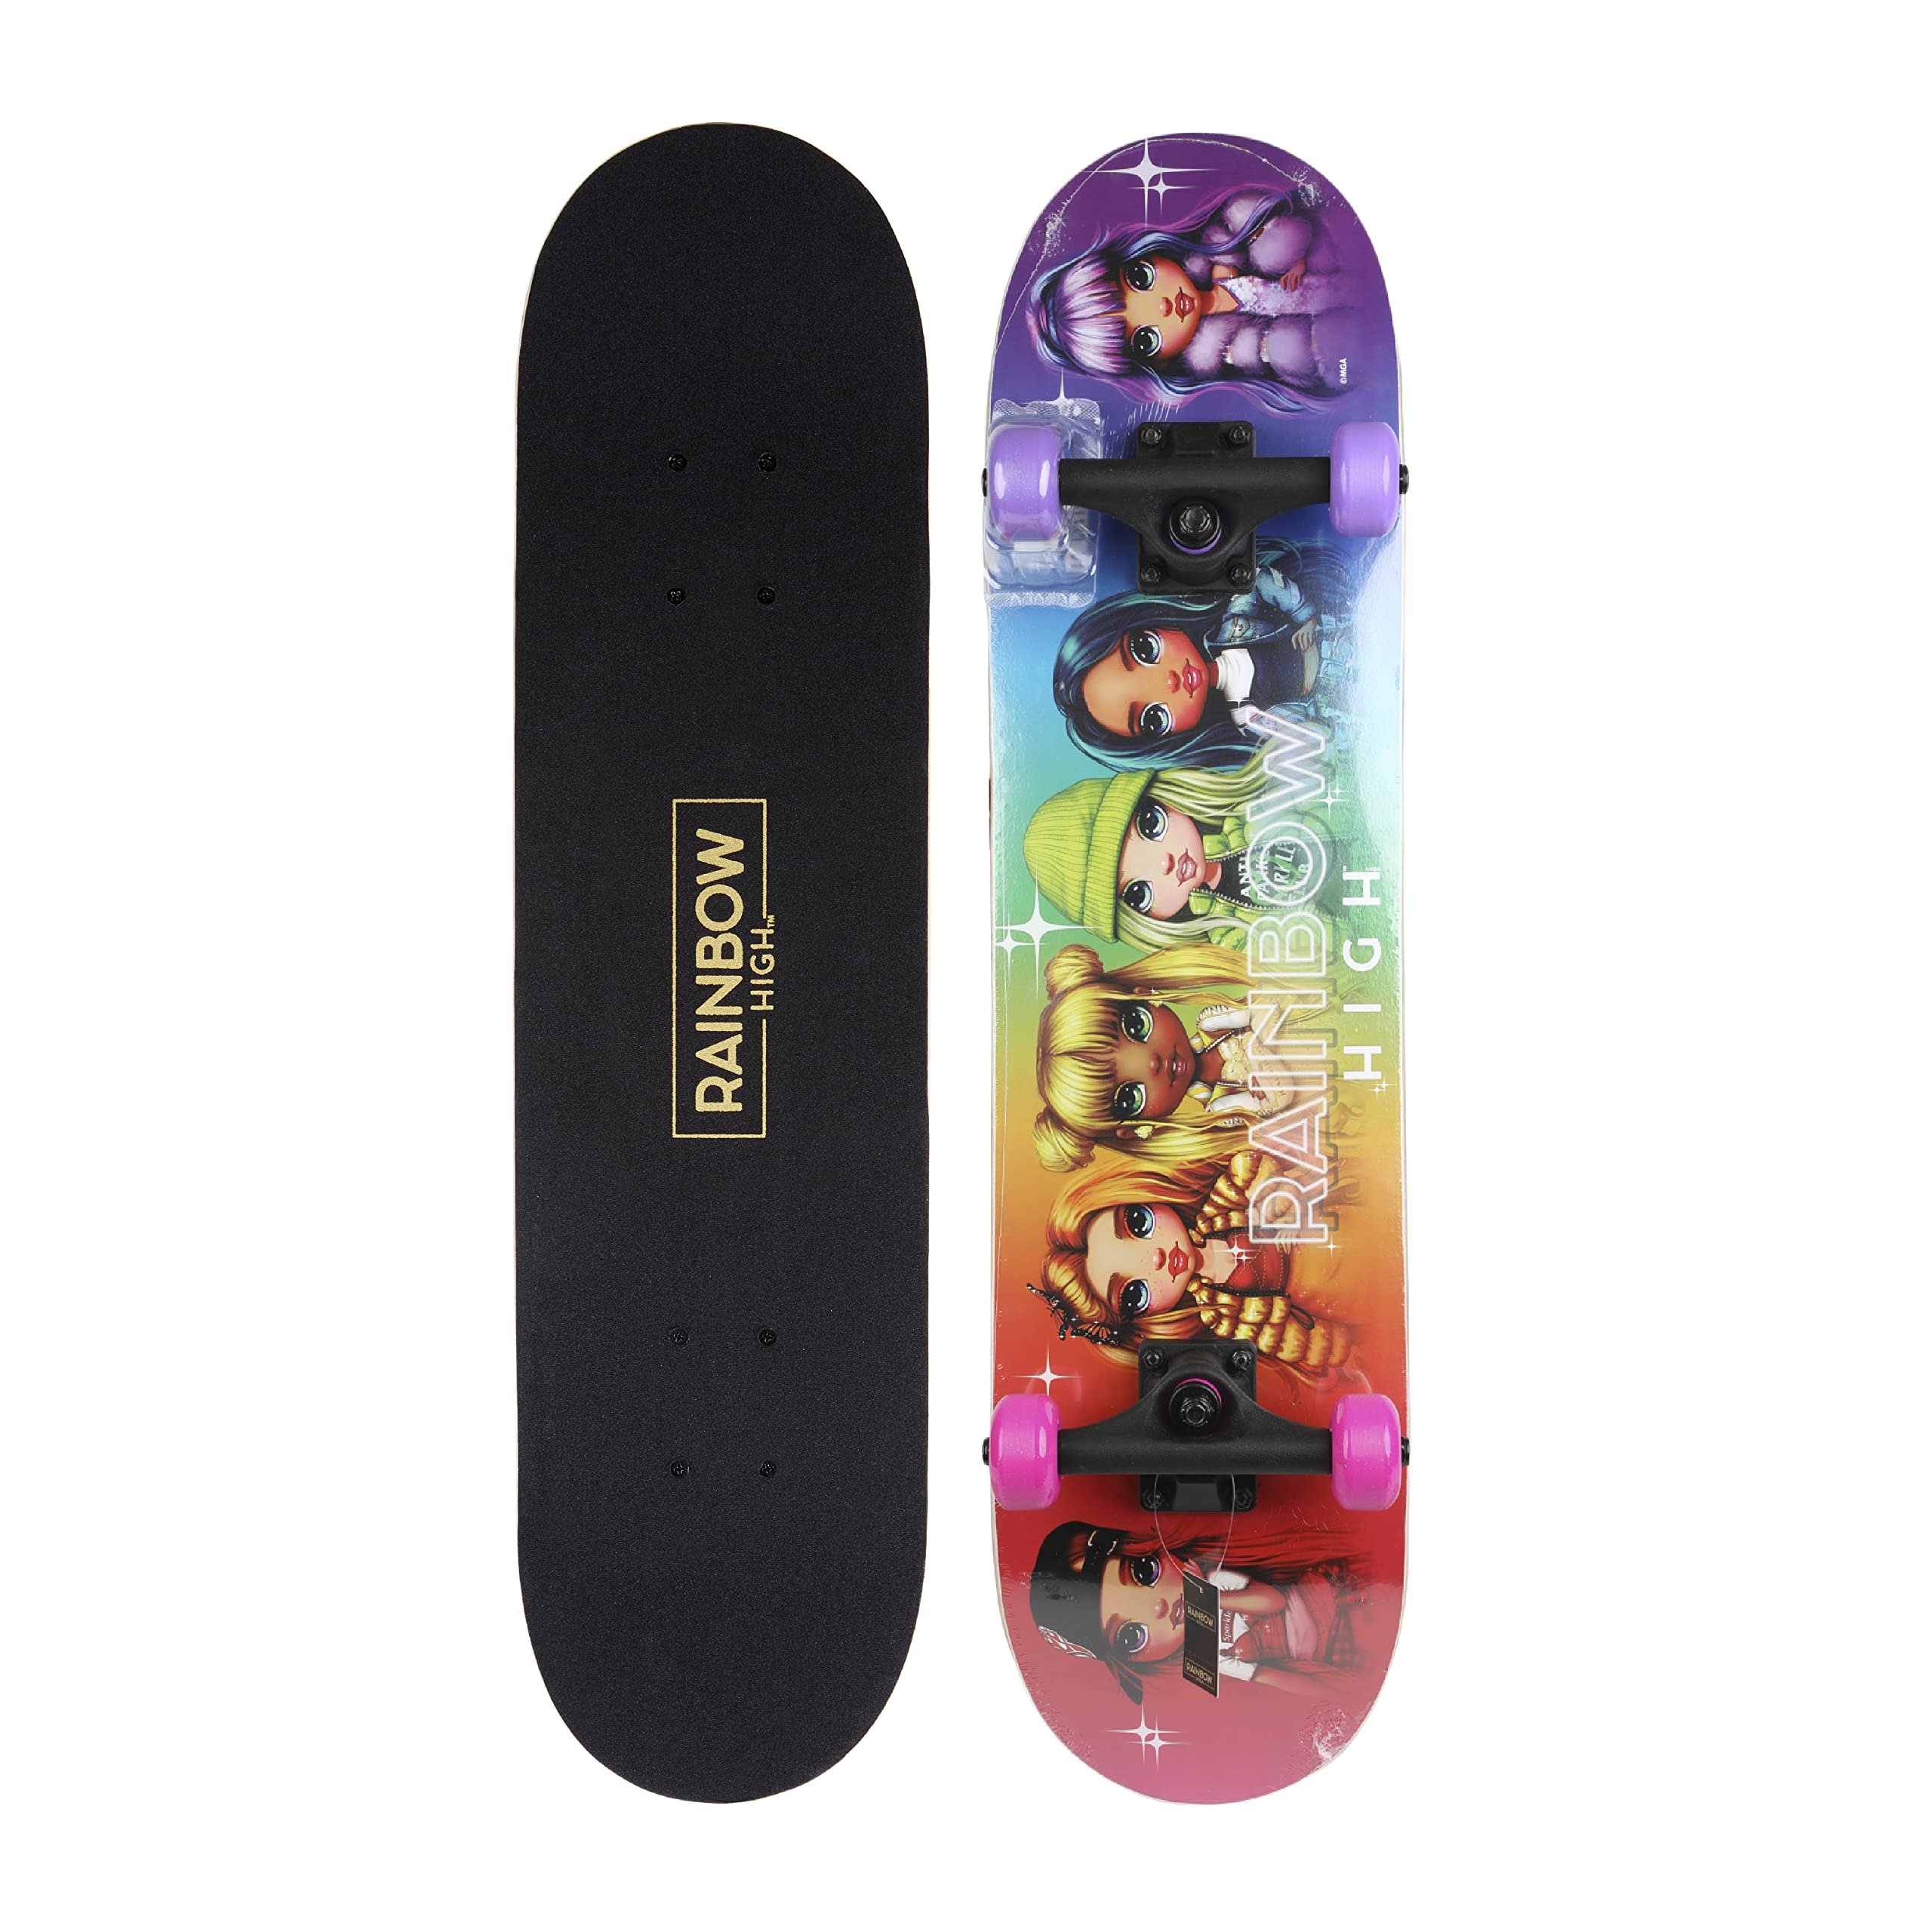 Rainbow High 31 inch Skateboard, 9-ply Maple Desk Skate Board for Cruising, Carving, Tricks and Downhill